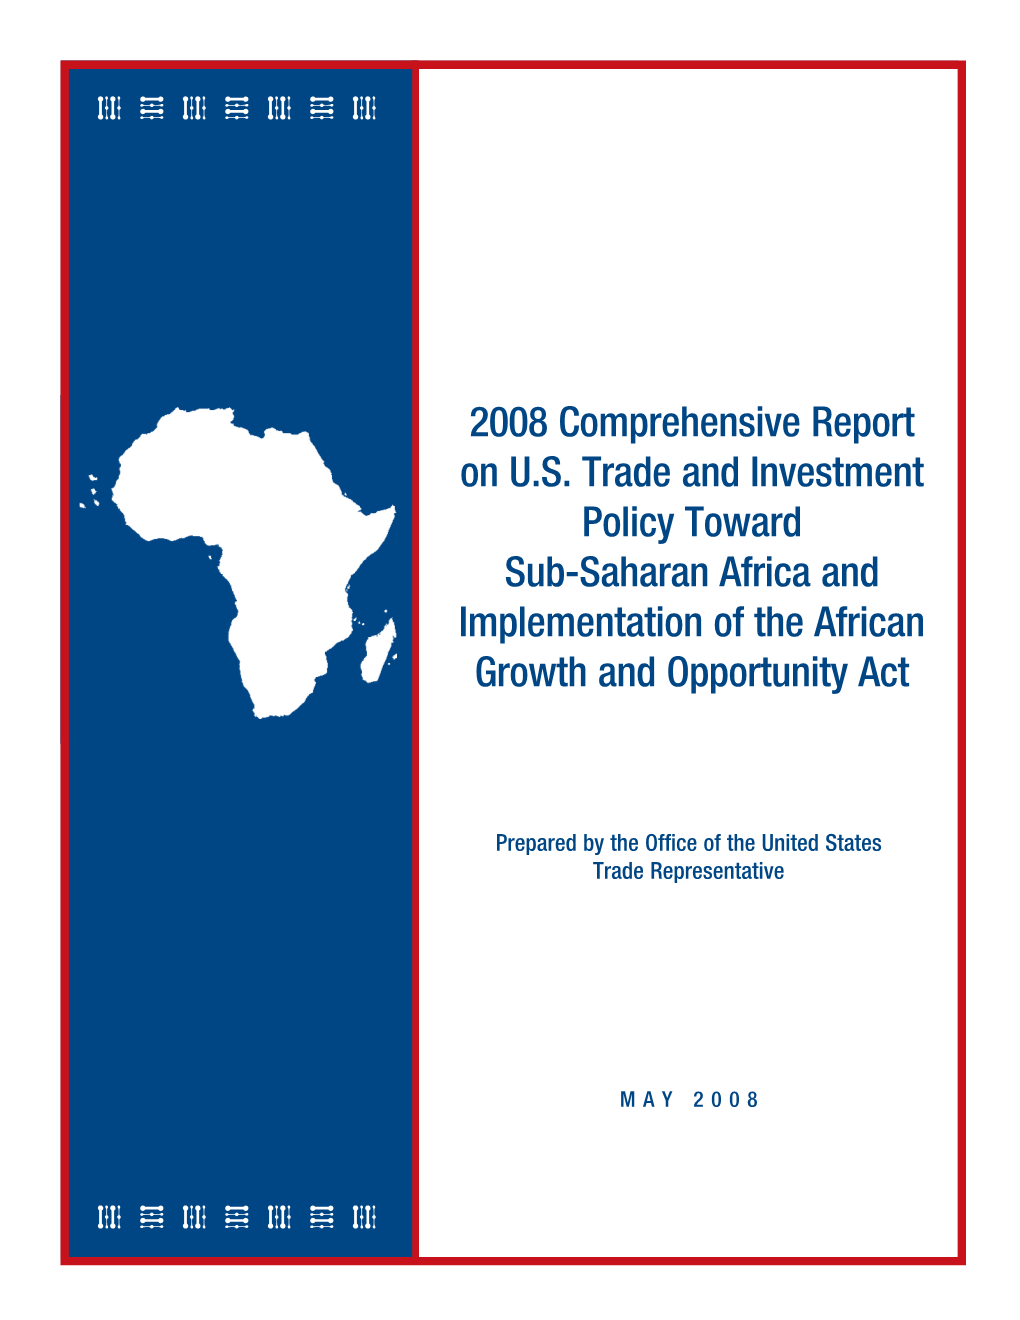 2008 Comprehensive Report on US Trade and Investment Policy Toward